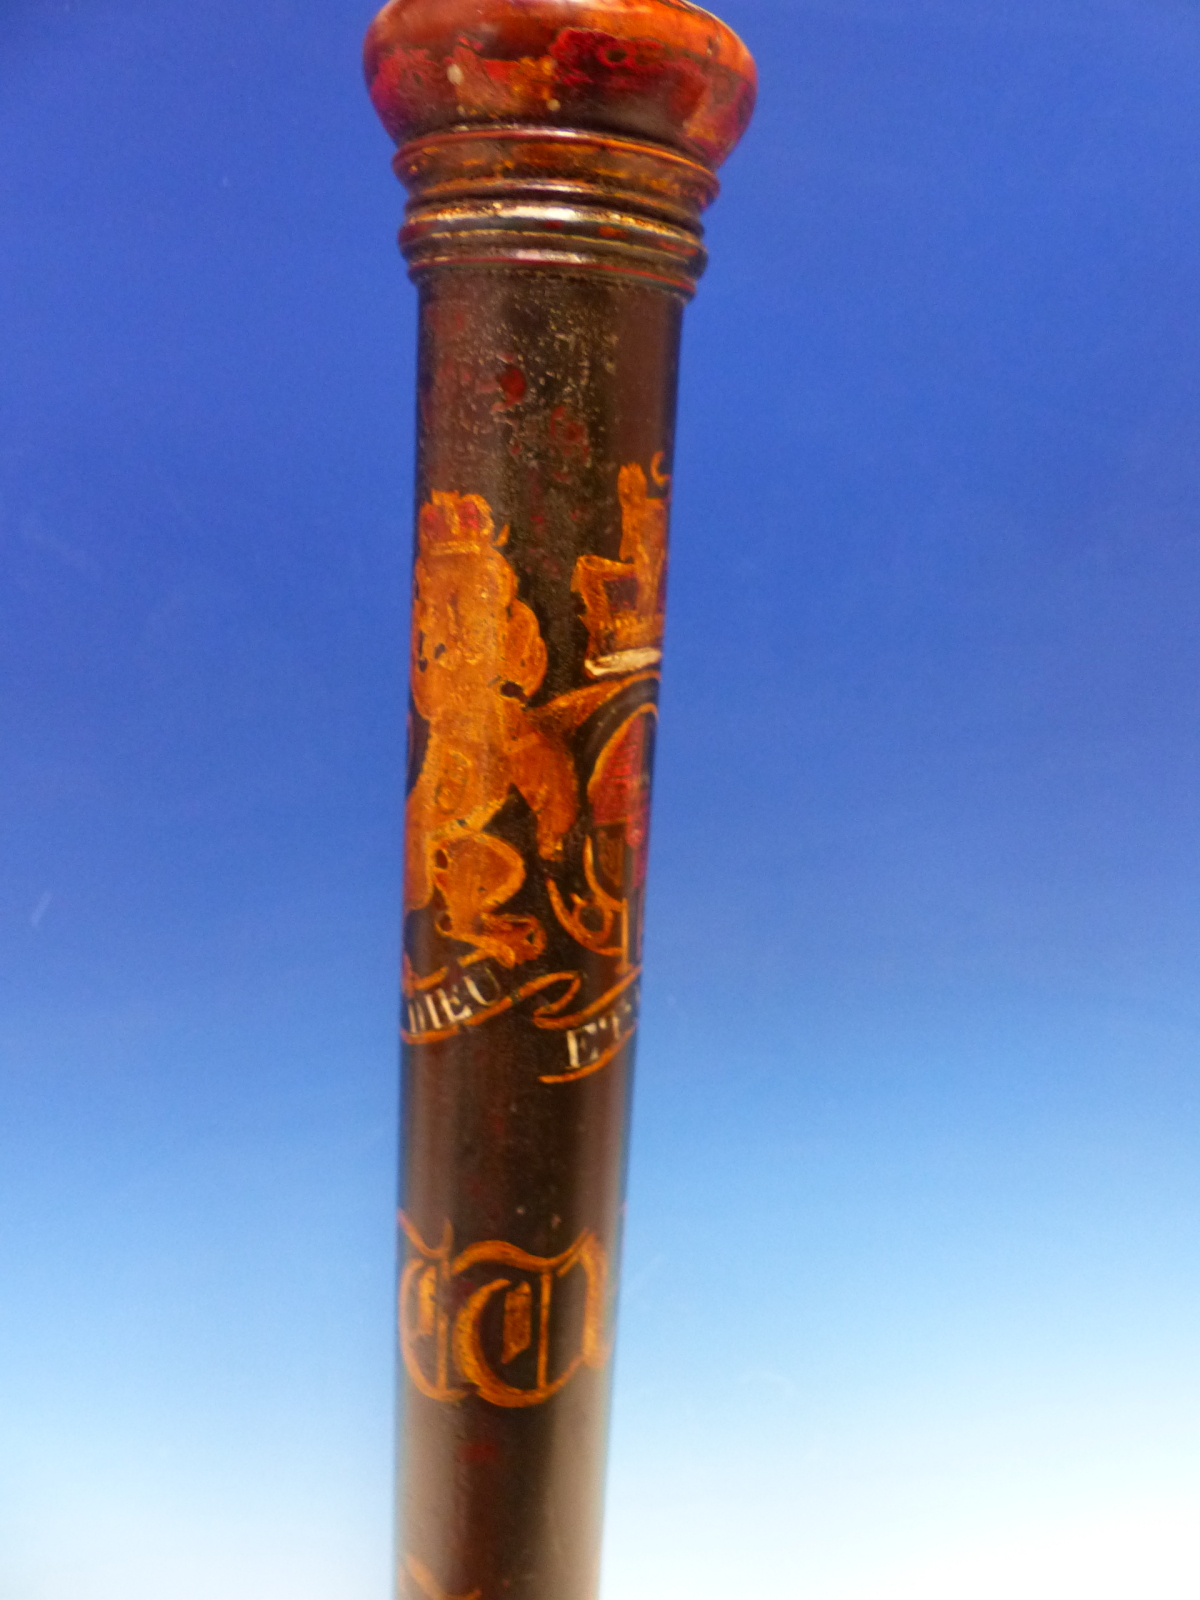 A WILLIAM IV TRUNCHEON PAINTED WITH THE ROYAL COAT OF ARMS AND A DATE 1825 ON A BAND ABOVE THE - Image 5 of 10